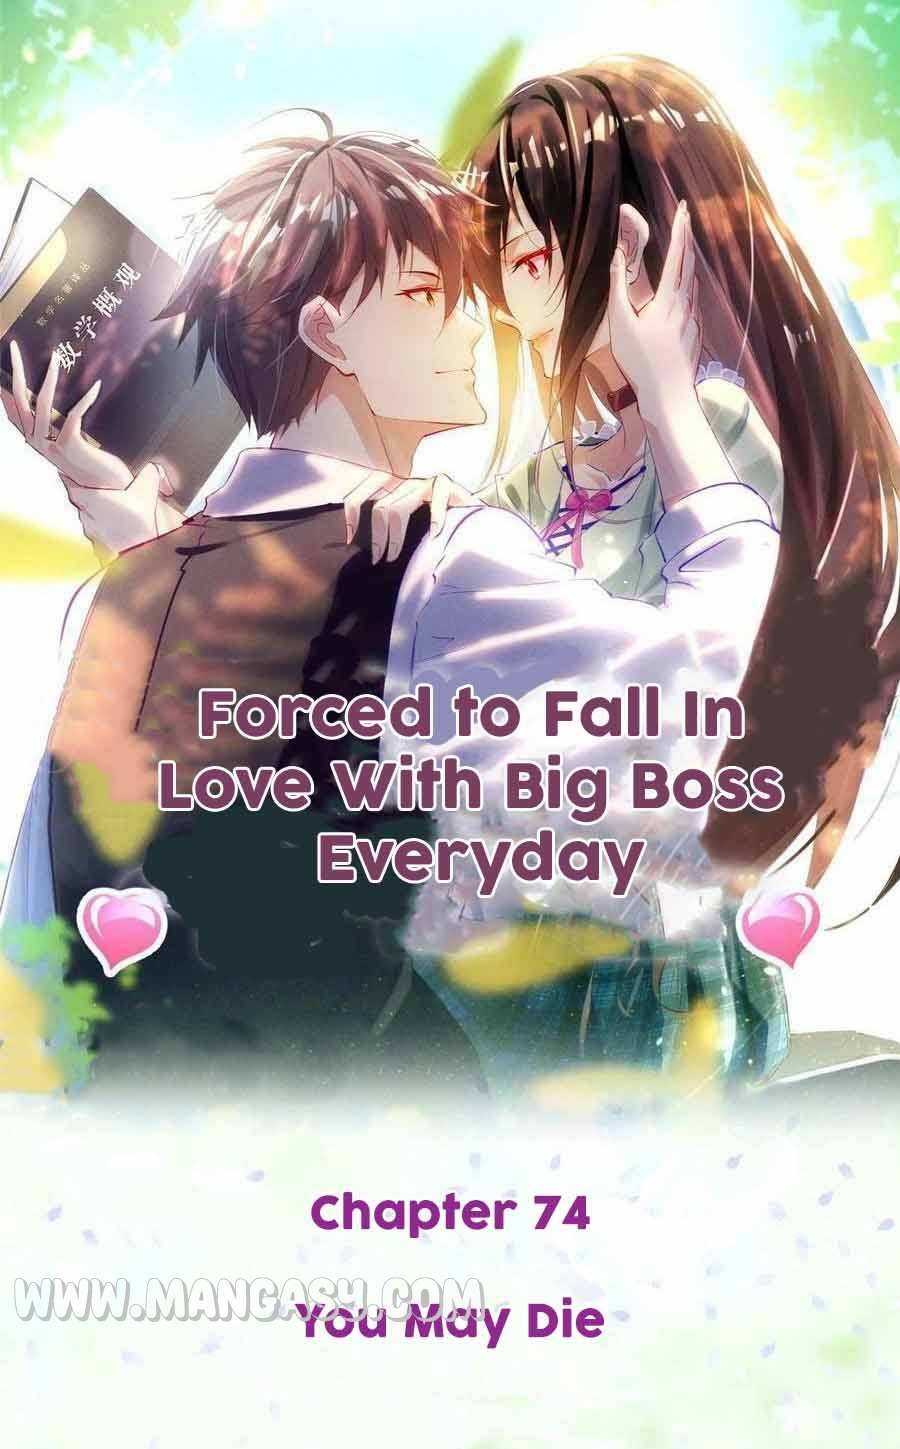 I Am Being Chased To Fall In Love Everyday - Page 2